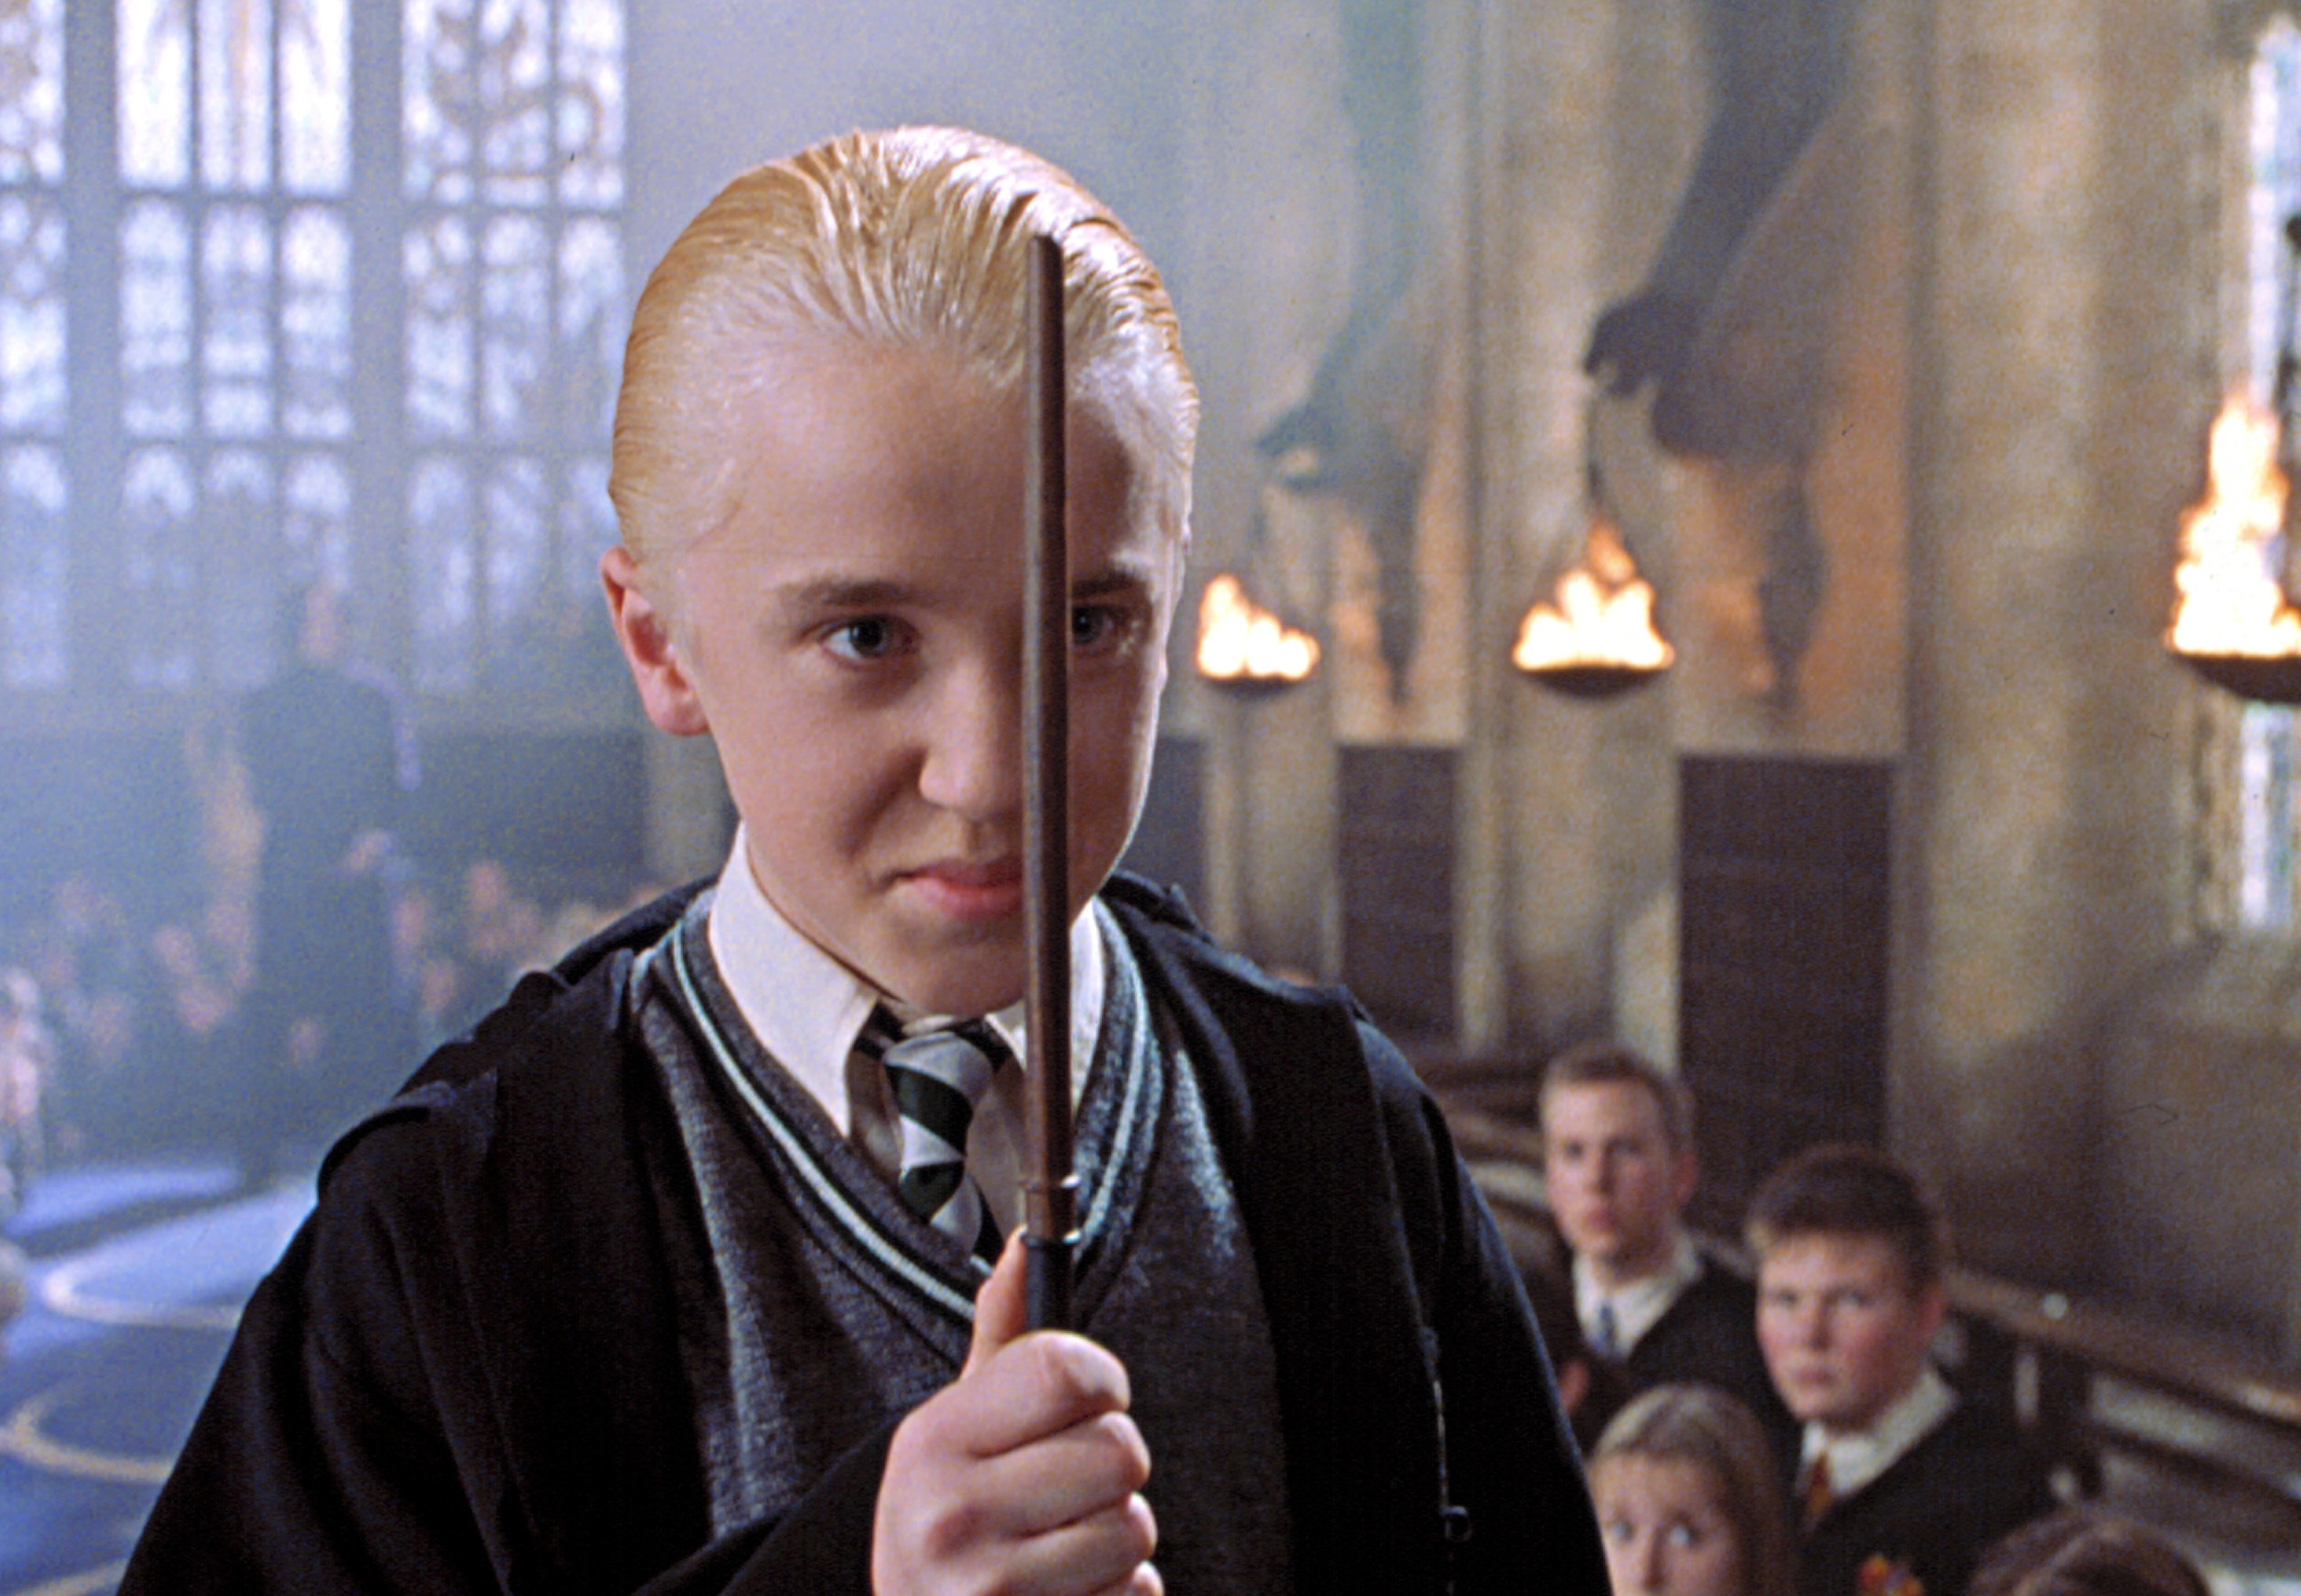 Draco Malfoy from Harry Potter, in school robes, holding a wand